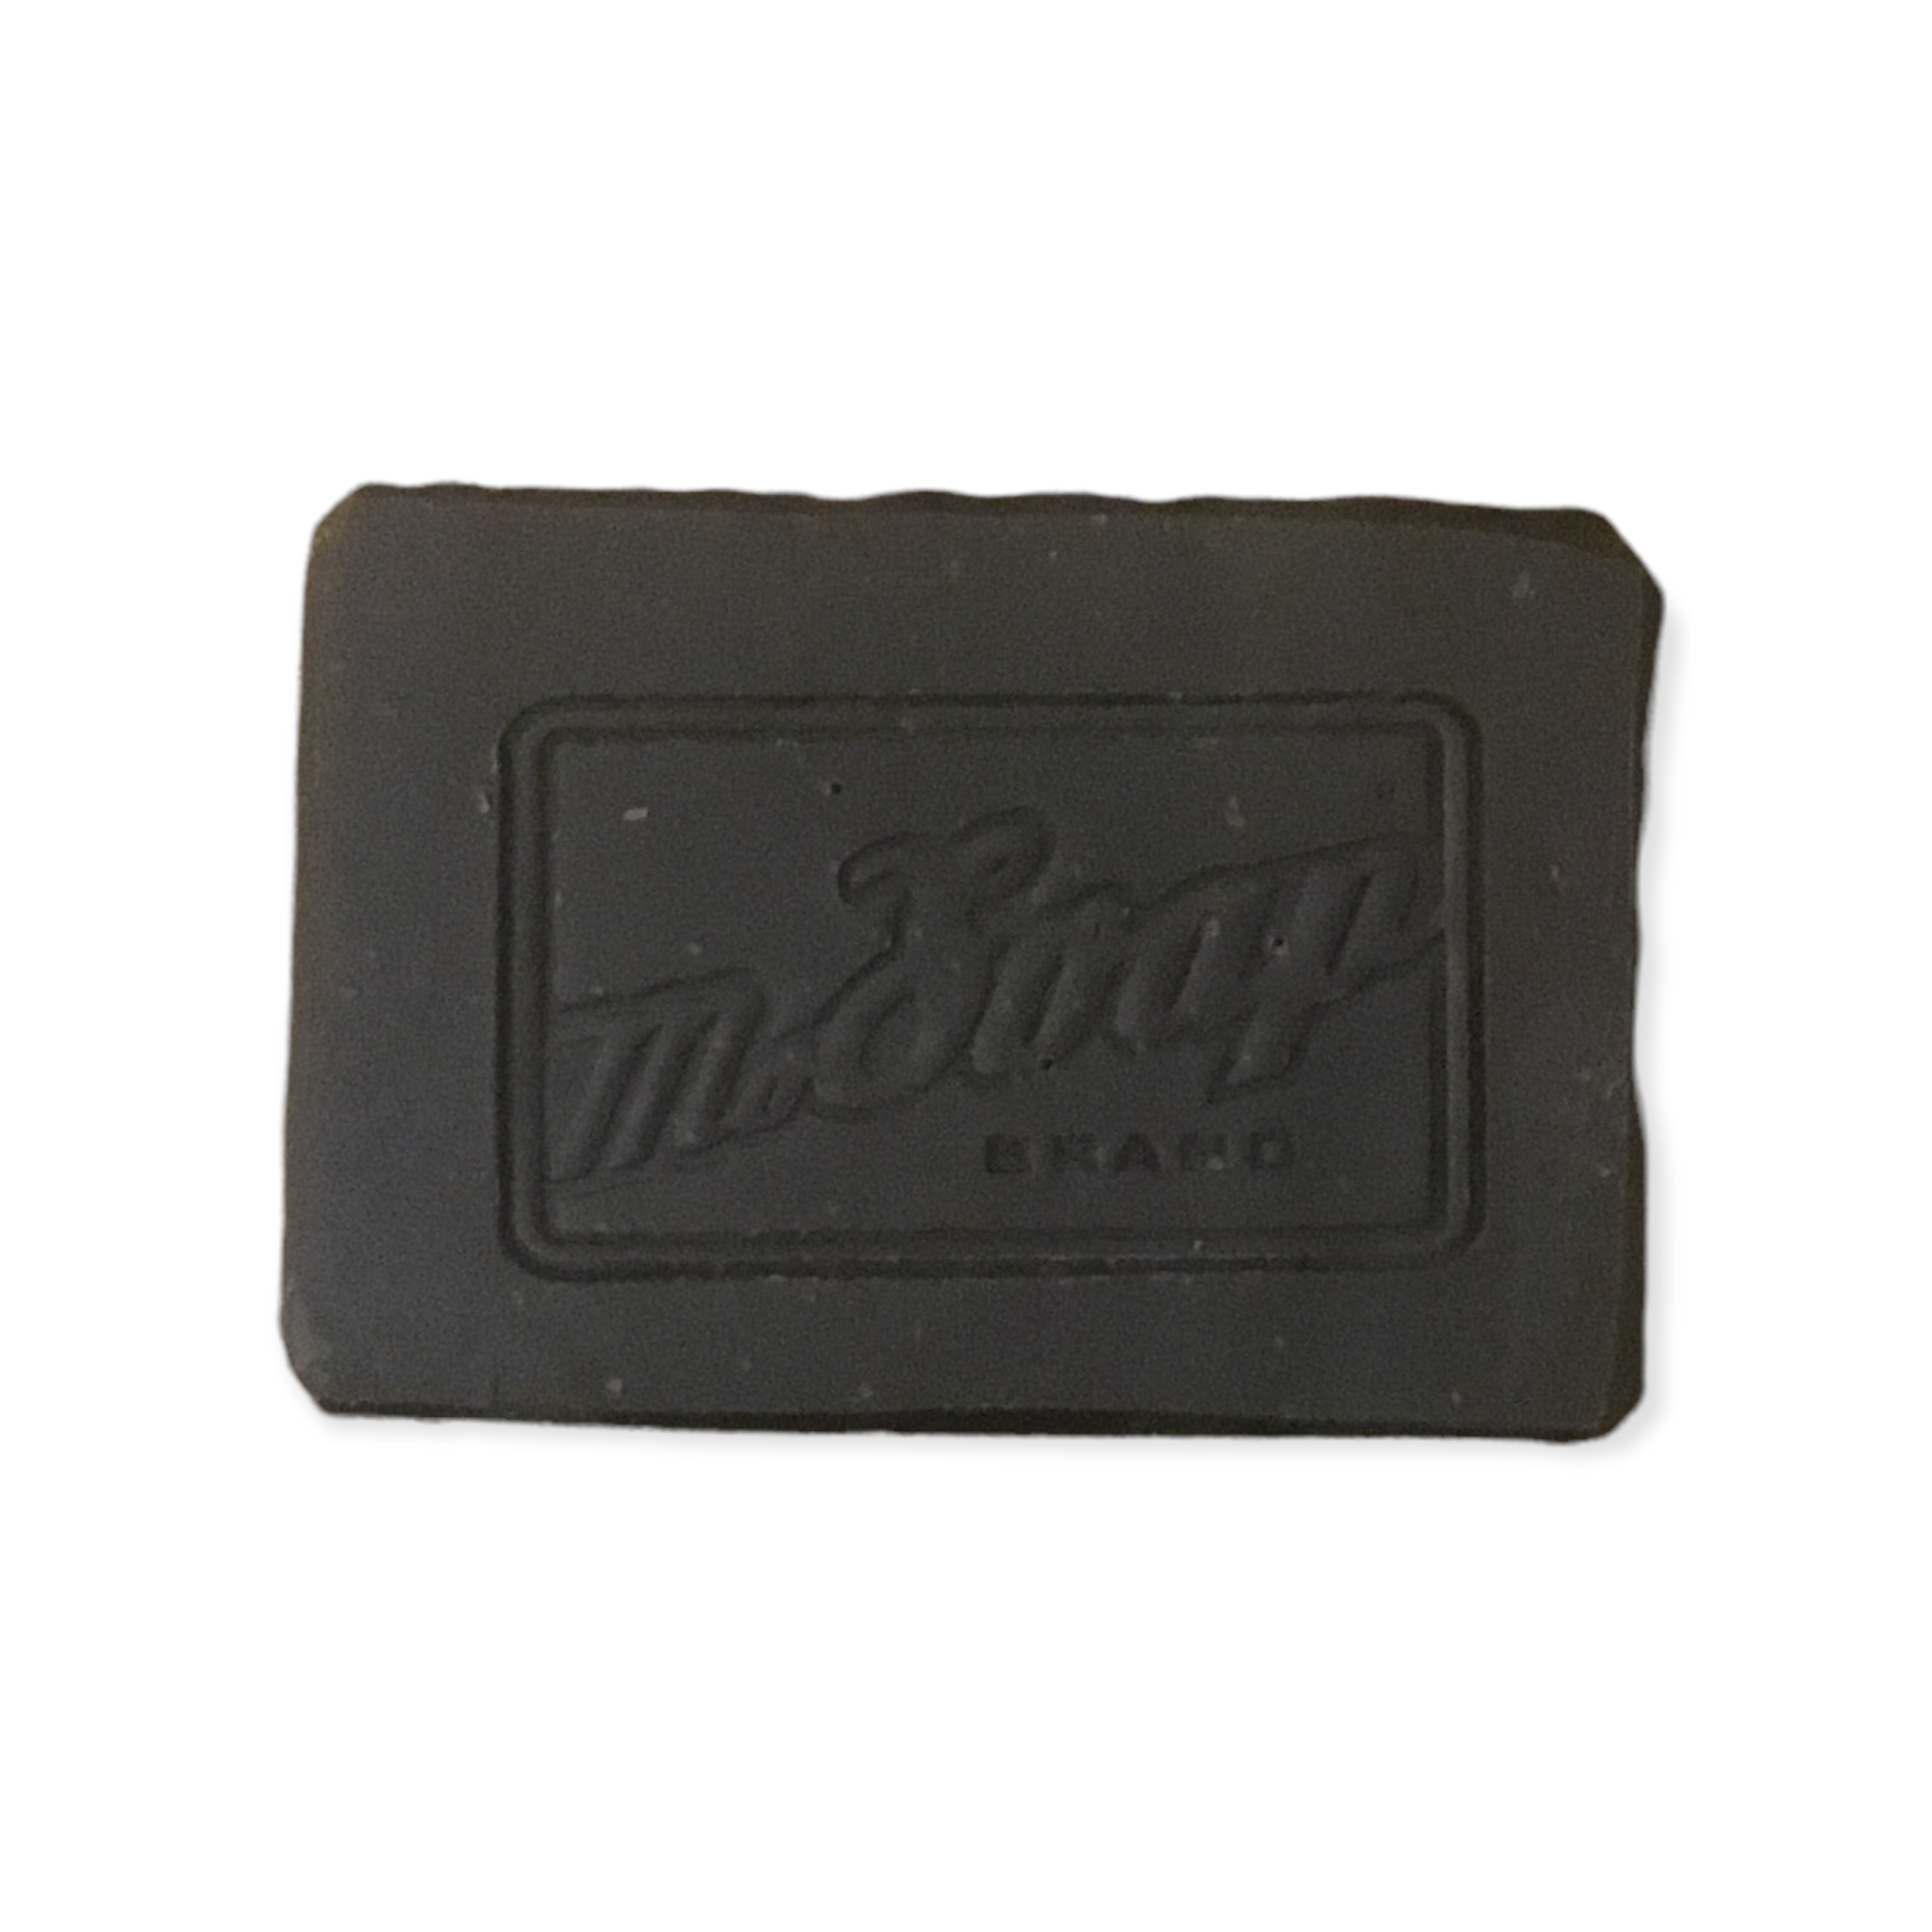 Pine Tar Soap with Goat Milk - Unscented 4.5 oz